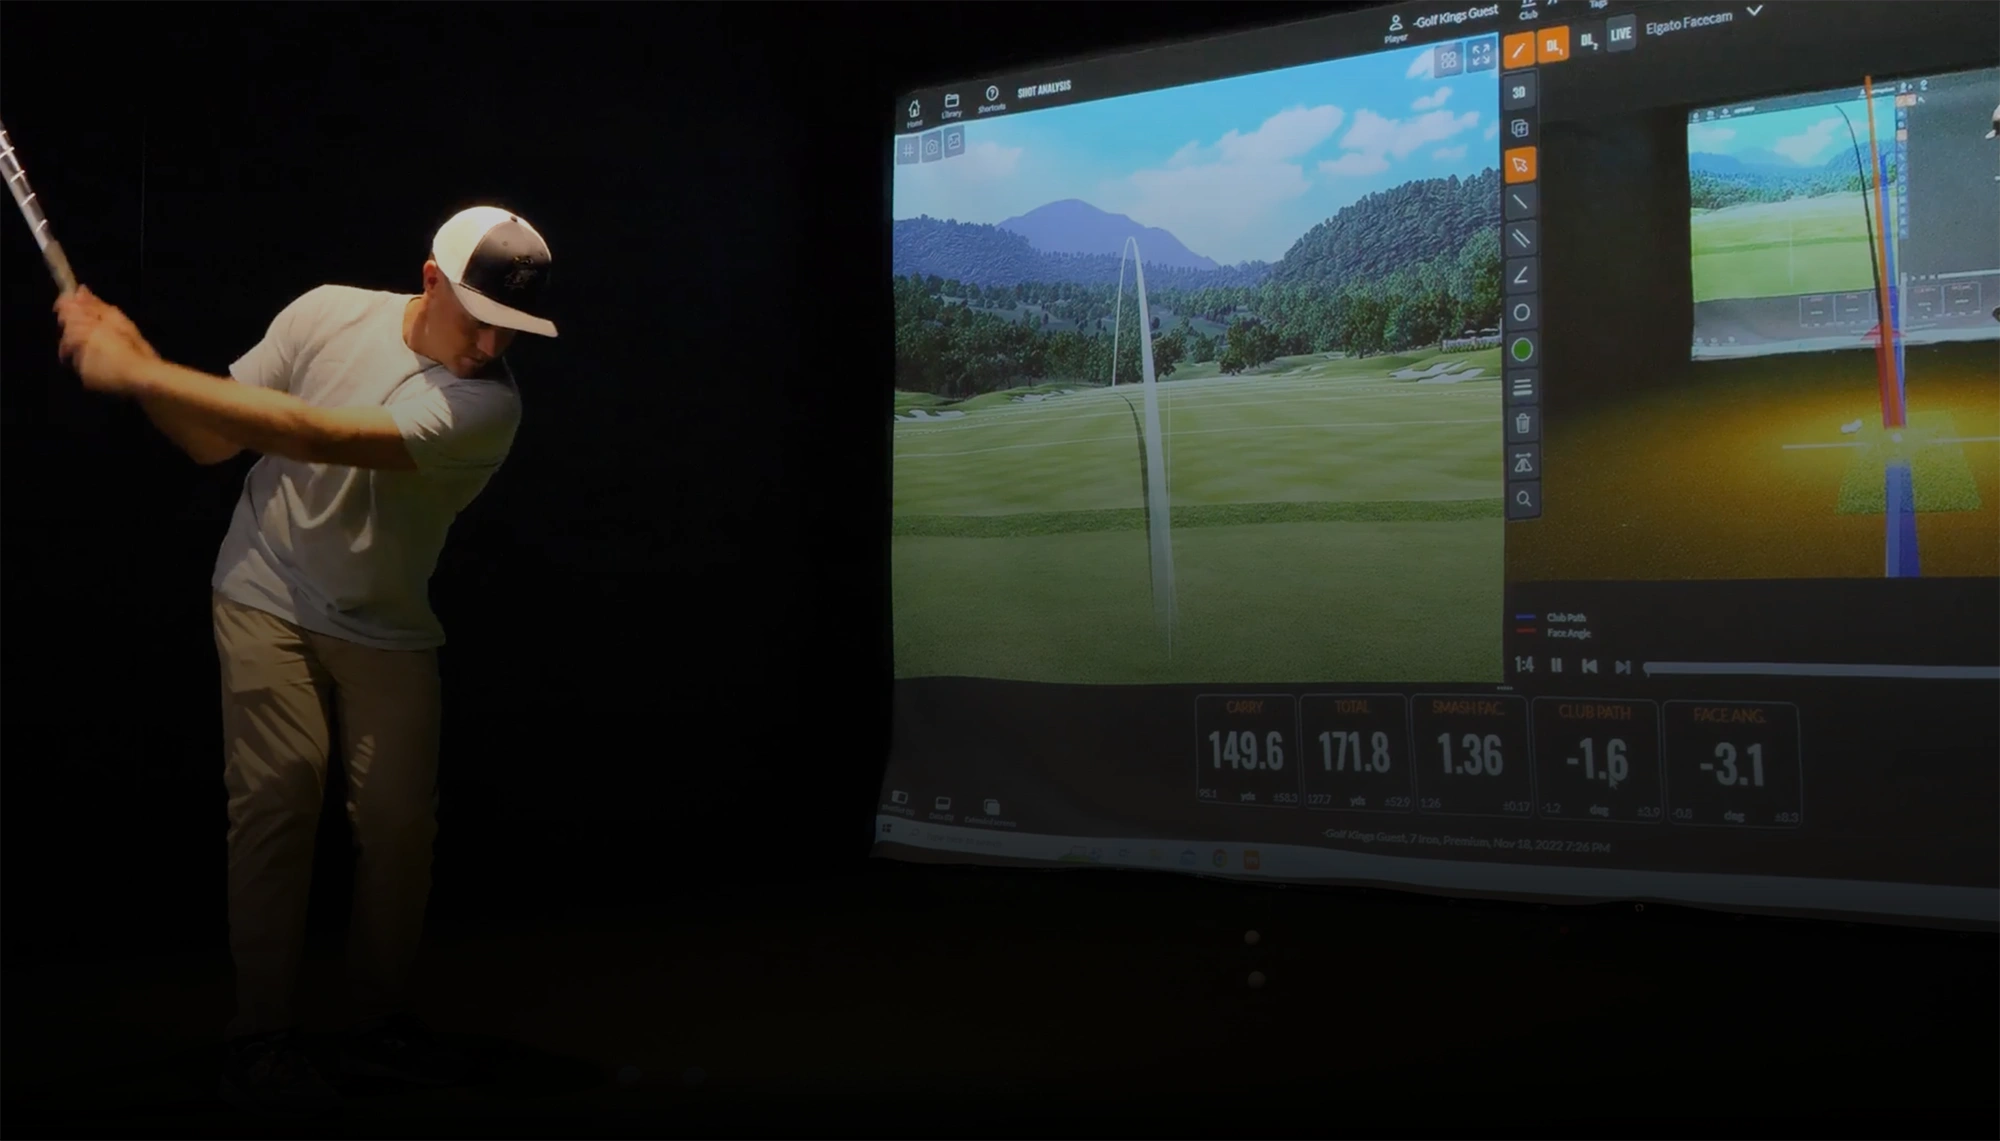 Guy playing on an indoor golf simulation game